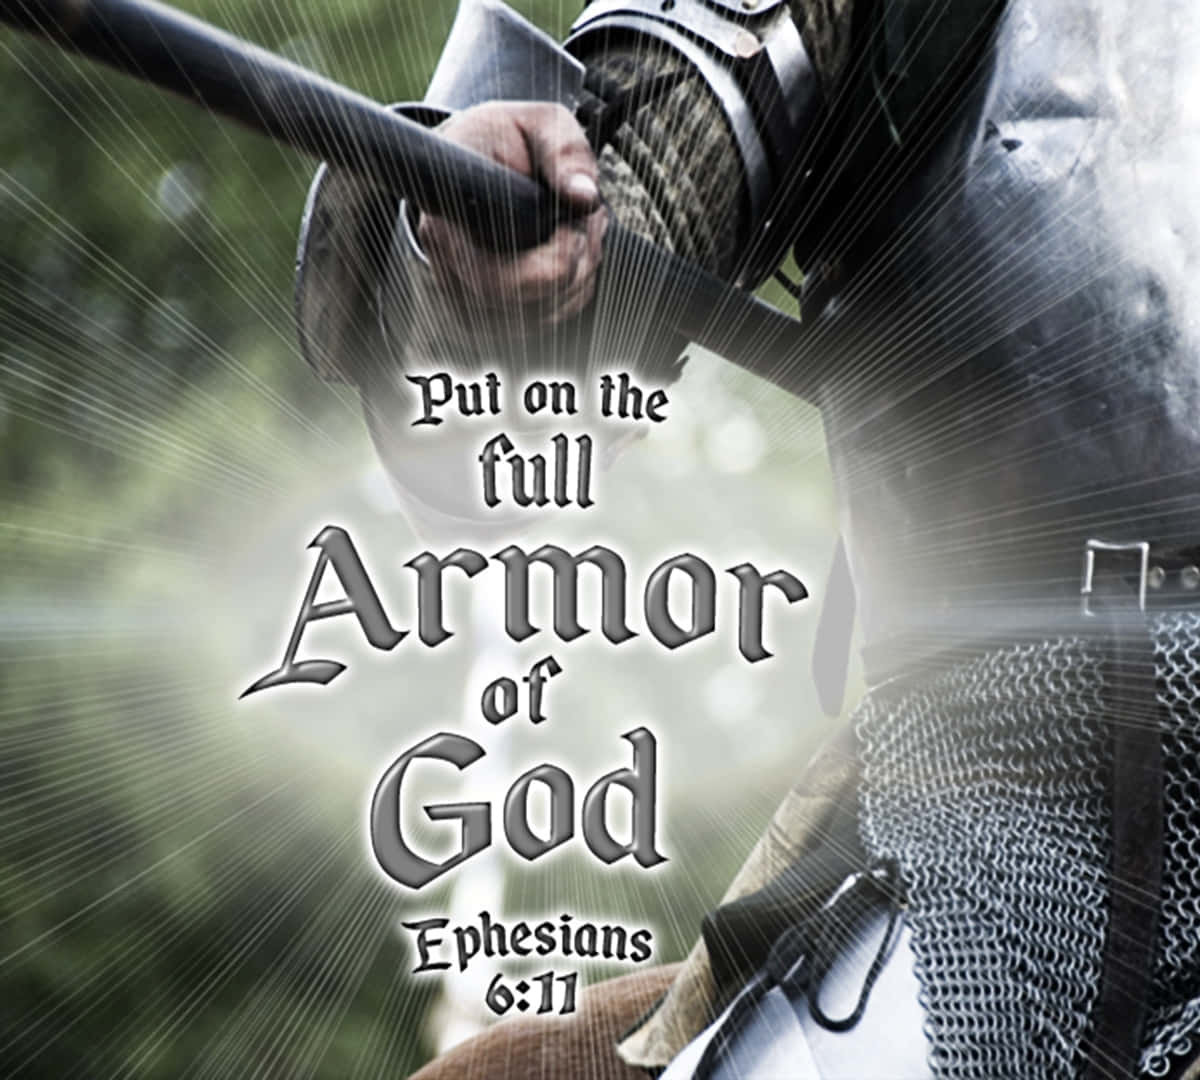 "Be Clothed in the Armor Of God" Wallpaper